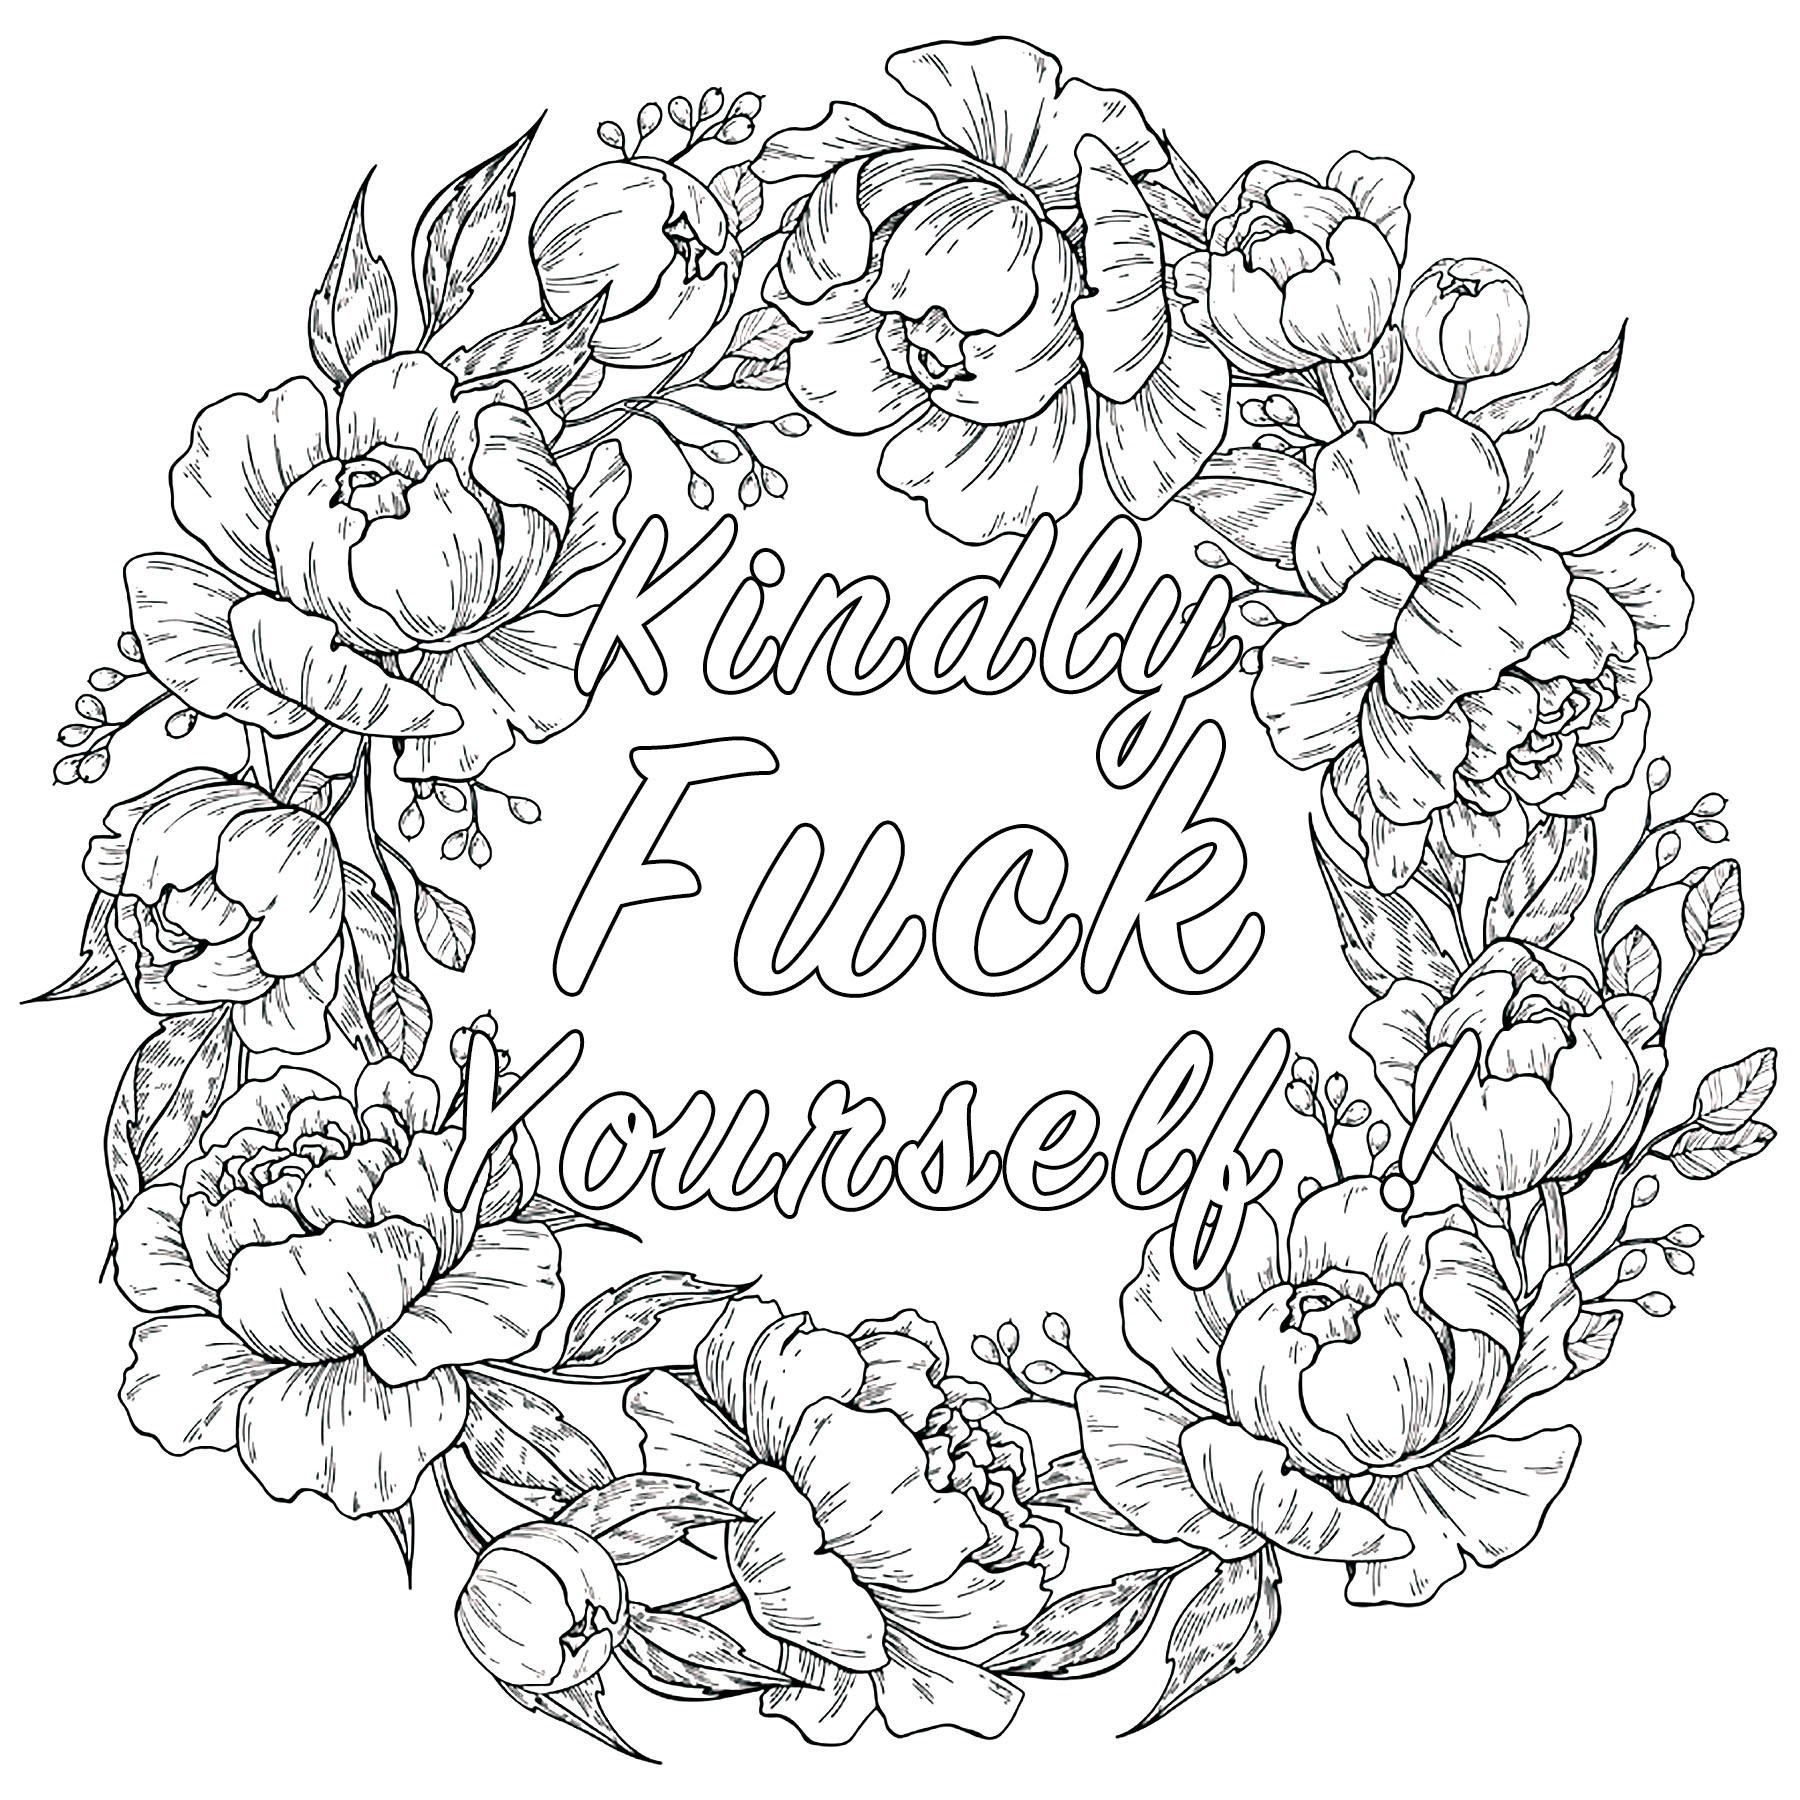 Kindly Fuck Yourself Swear word coloring page - Swear word Adult ...